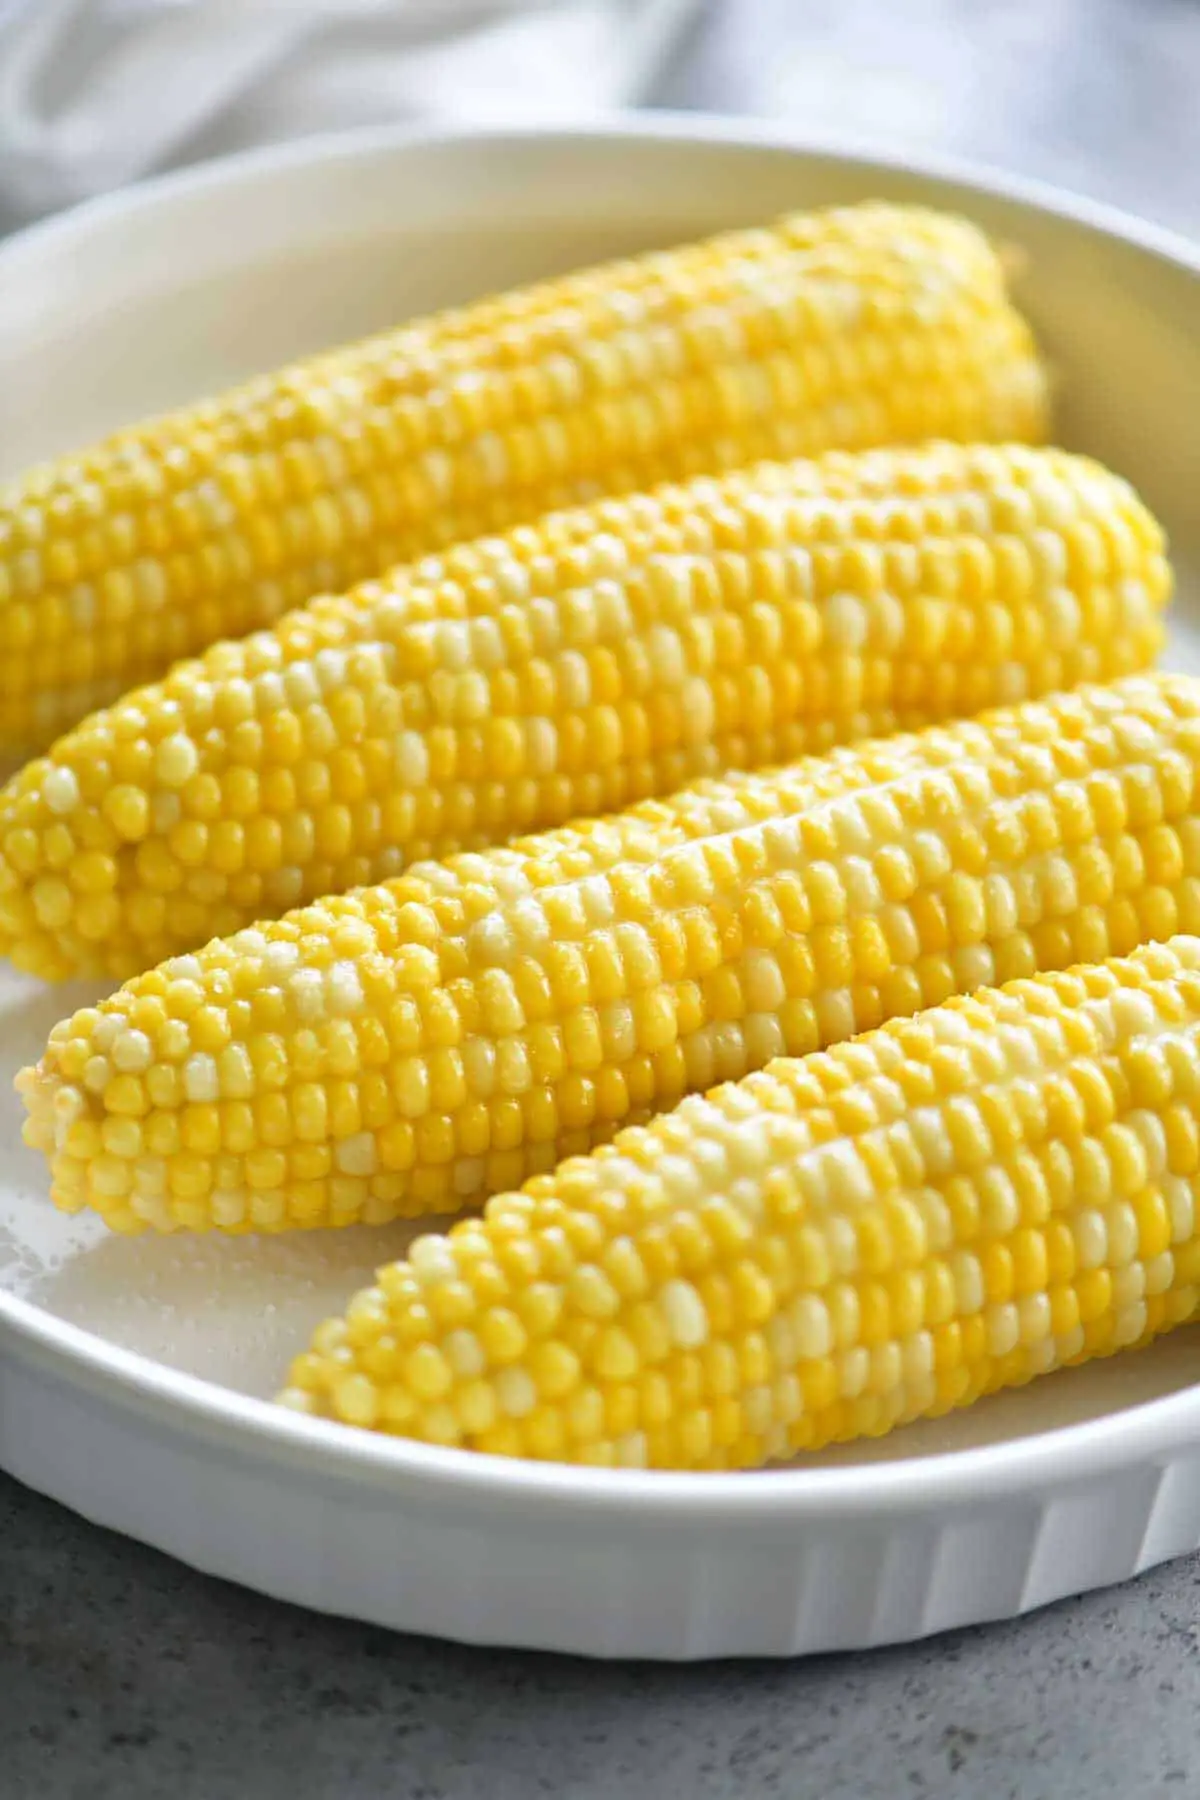 How Long to Boil Corn on the Cob? â The Housing Forum